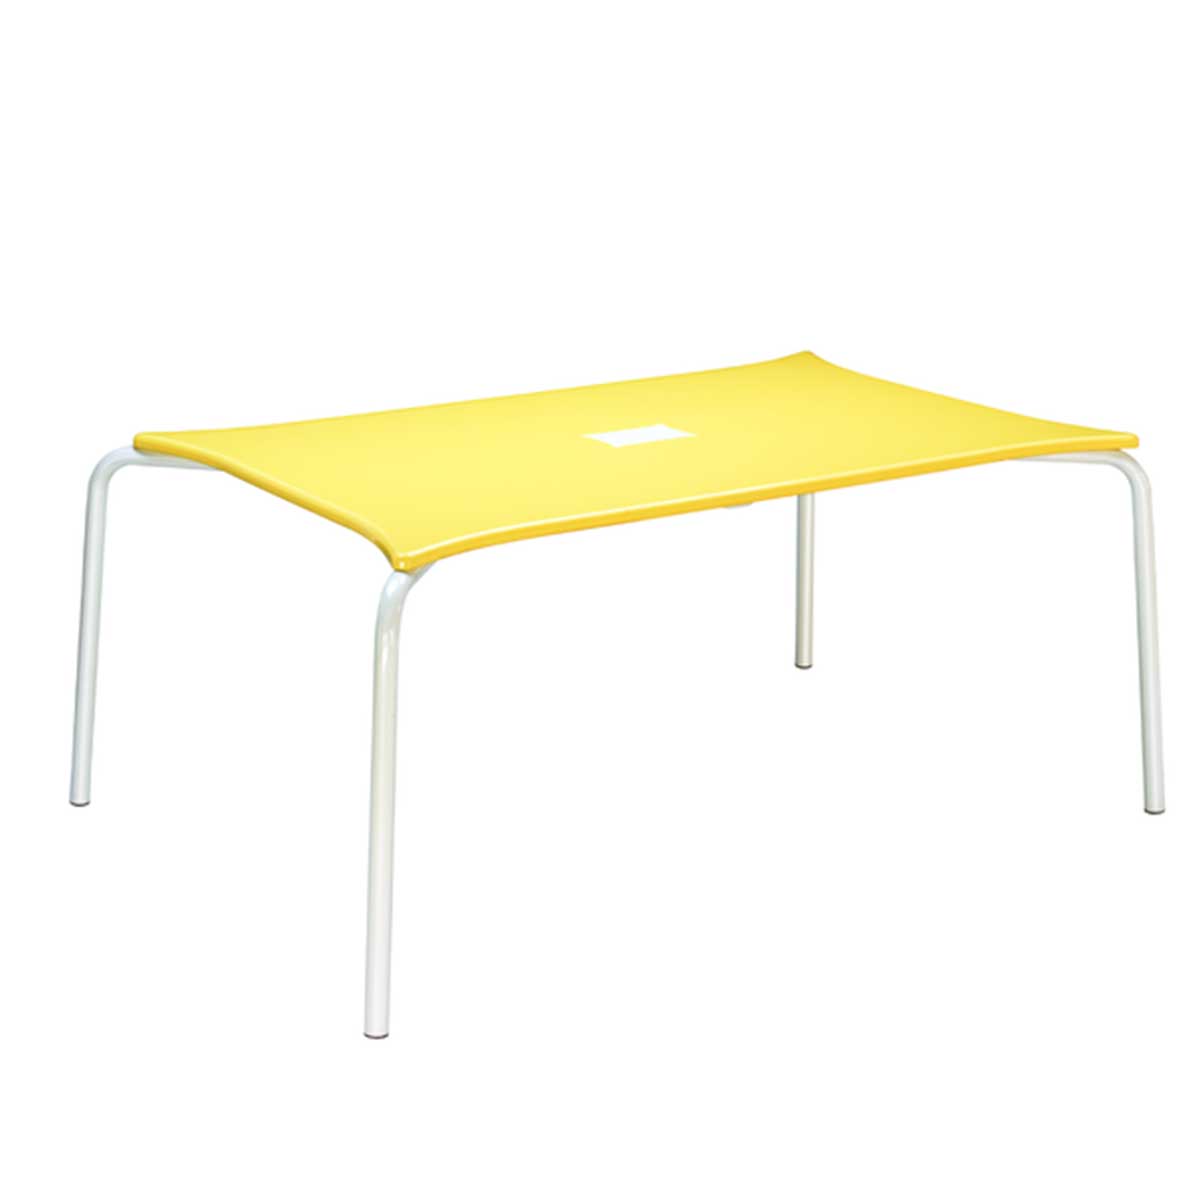 Cafeteria Table Manufacturers, Suppliers in Rohini Sector 22